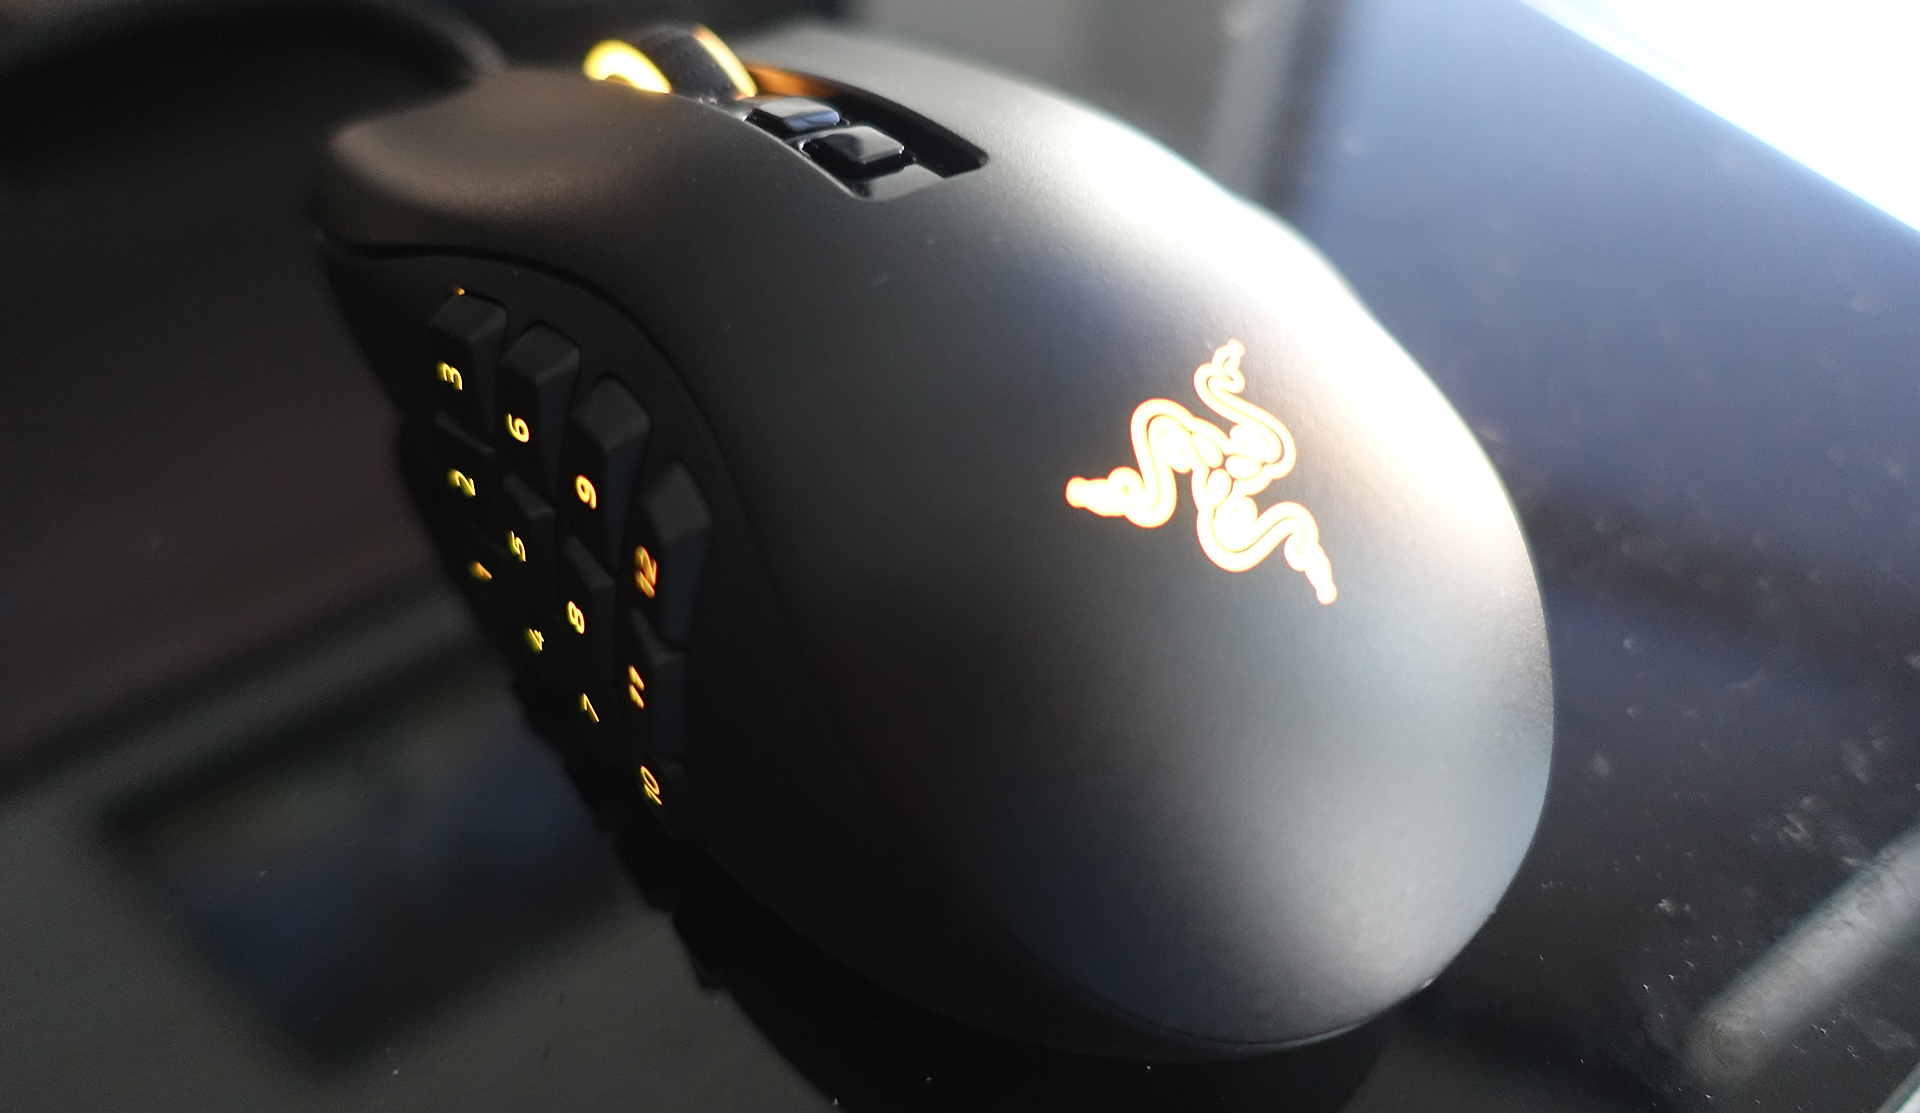 Razer Naga Pro, A Premium Gaming Mouse That Is Cool For Editing